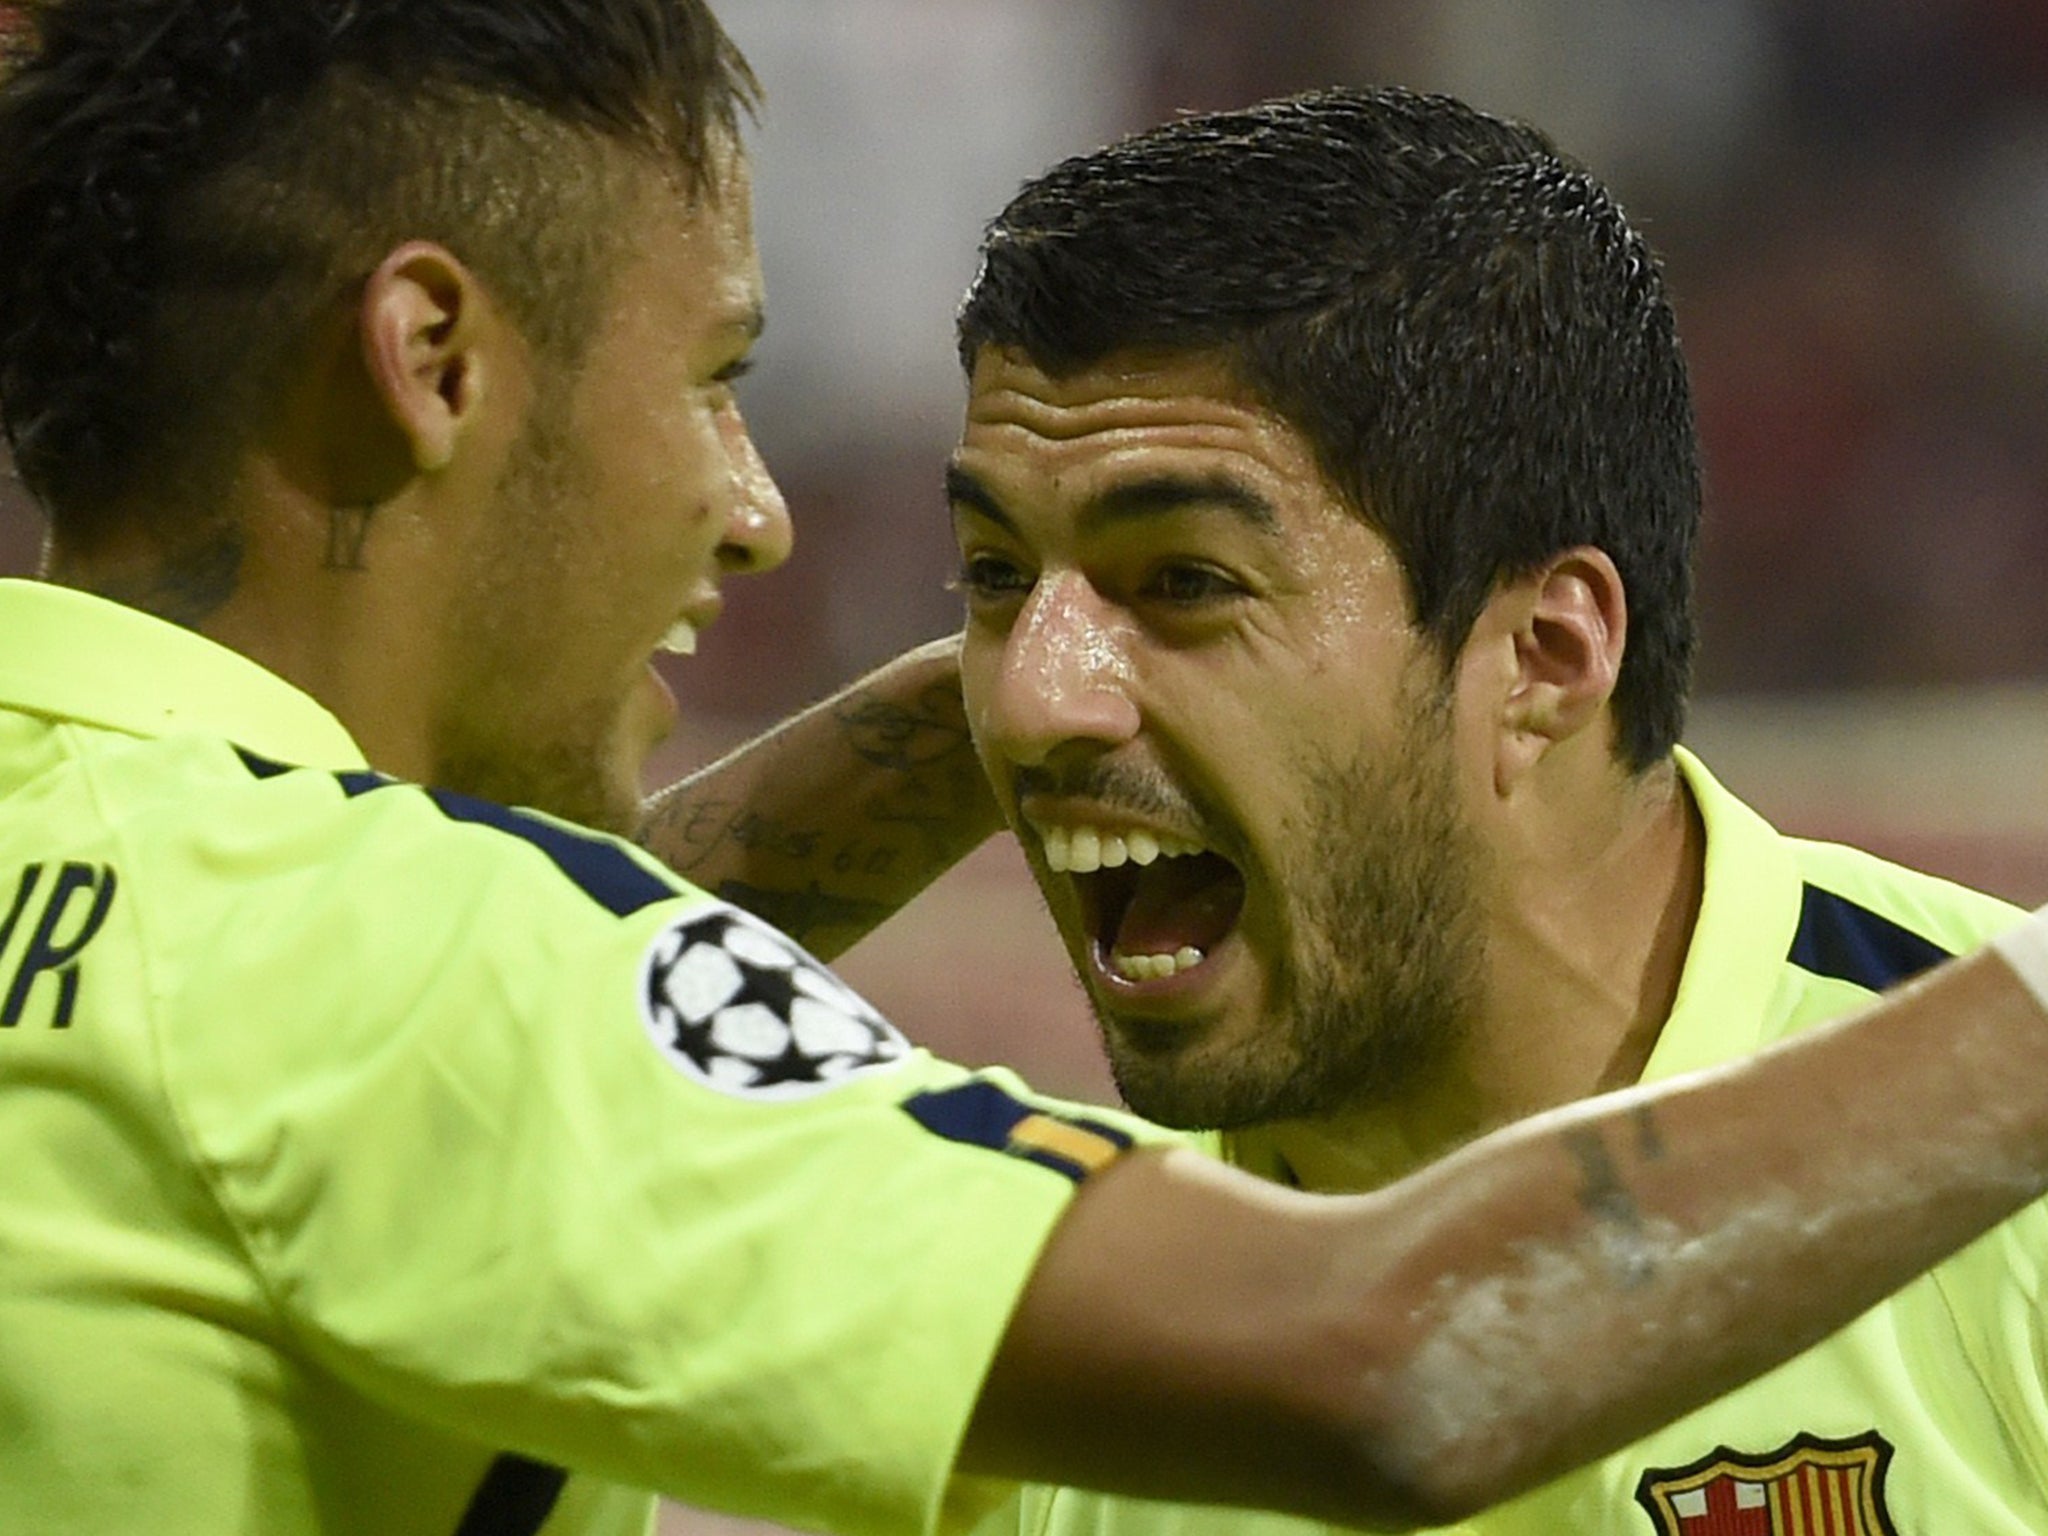 Luis Suarez celebrates with Neymar after the latter's goal against Bayern Munich